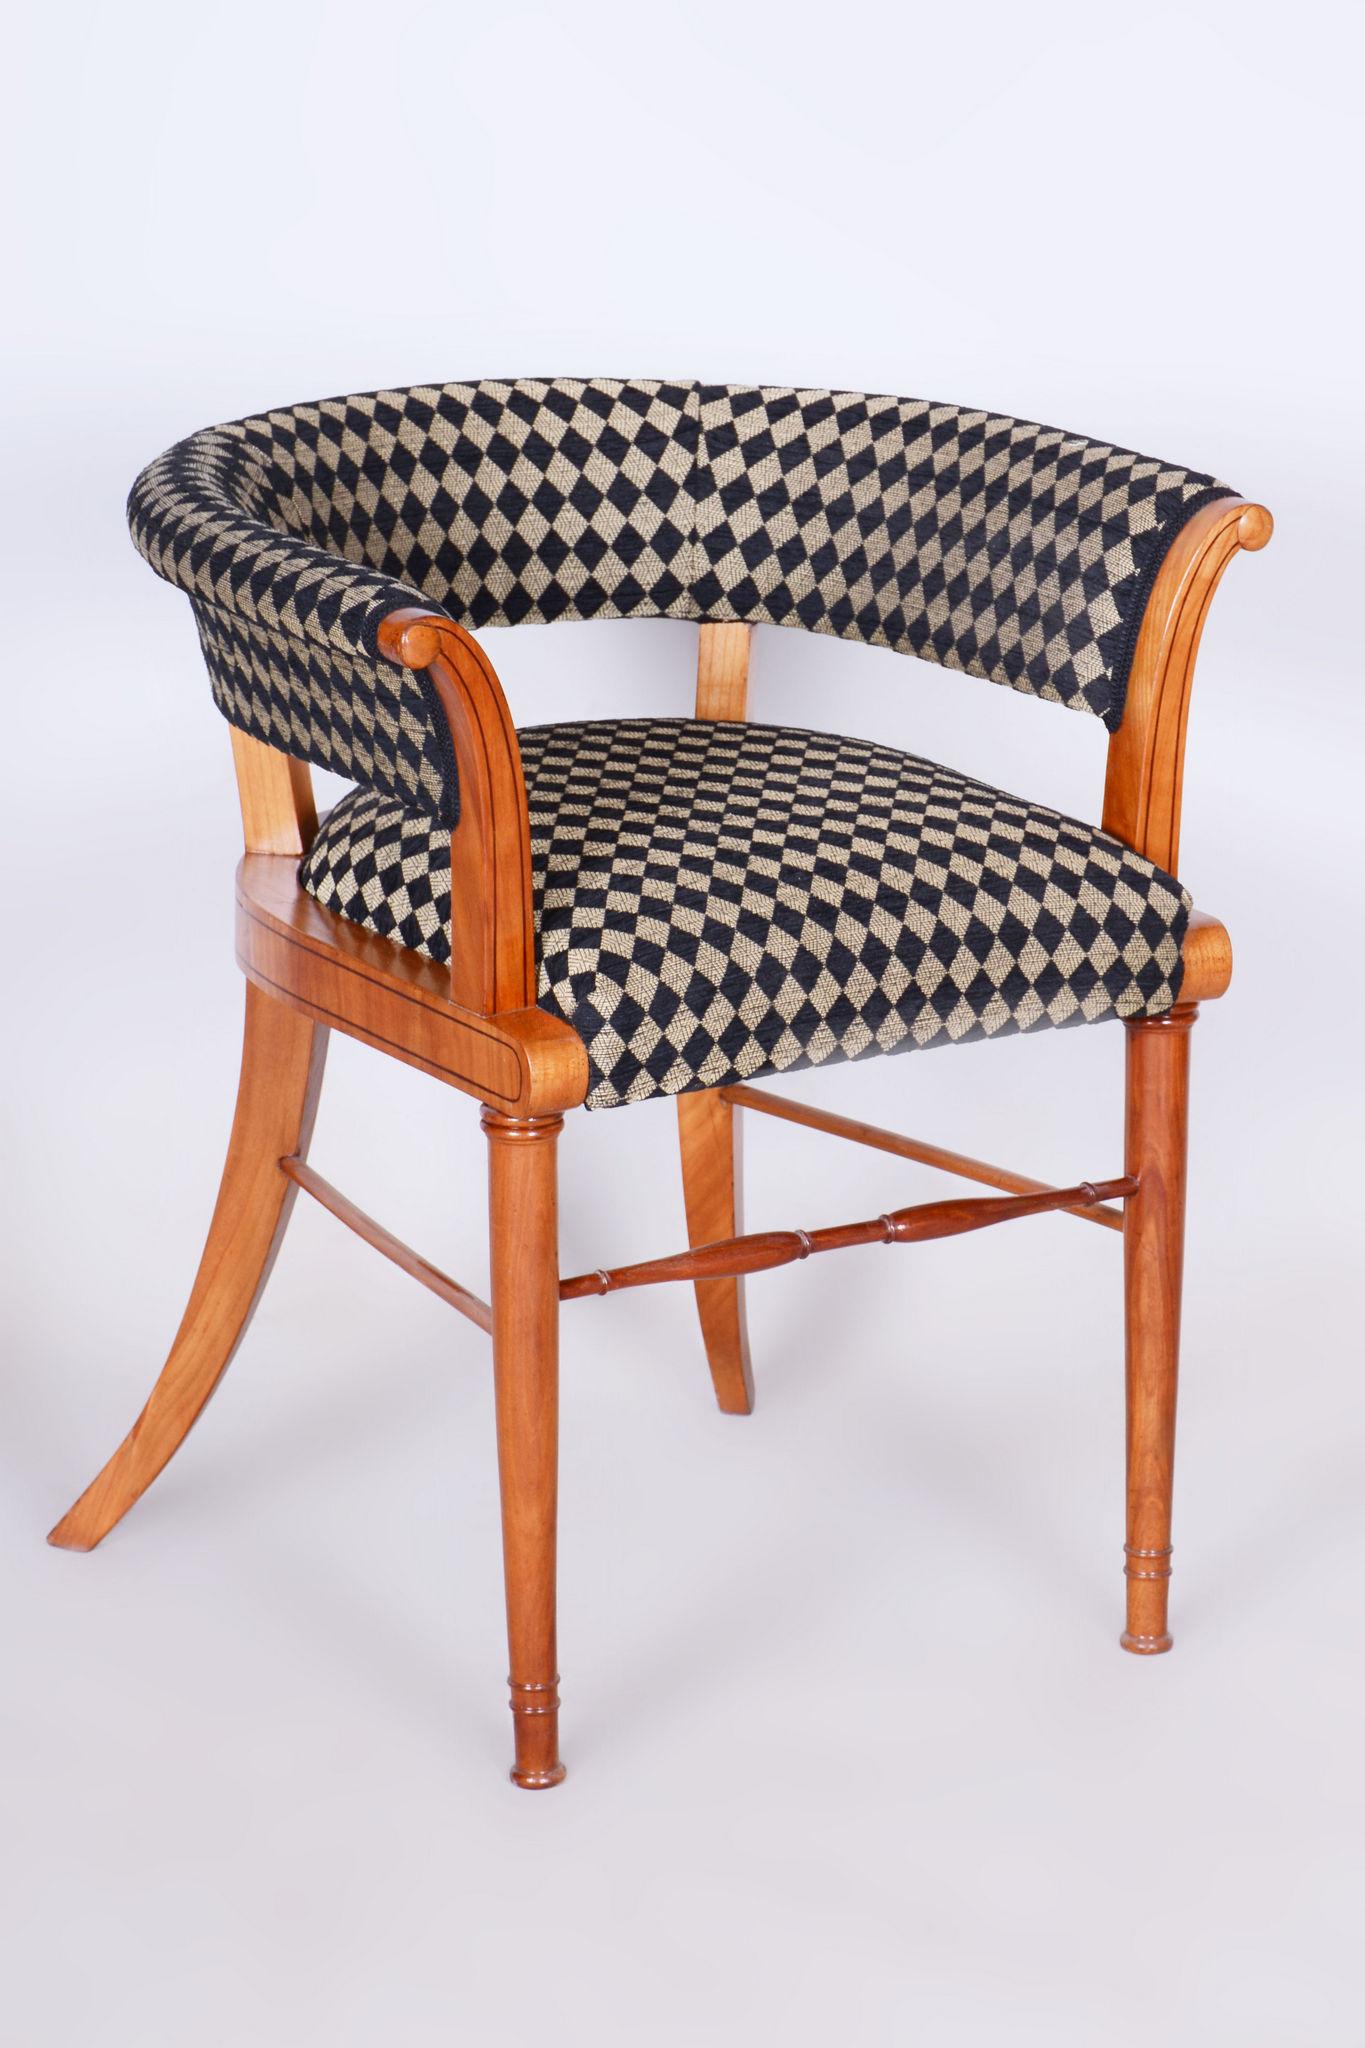 Restored Biedermeier Walnut Armchair attributed to Josef Danhauser.

According to the original process, our professional refurbishing team in Czechia has restored and reupholstered the item. 

It has been re-polished with polyutherane piano lacquer